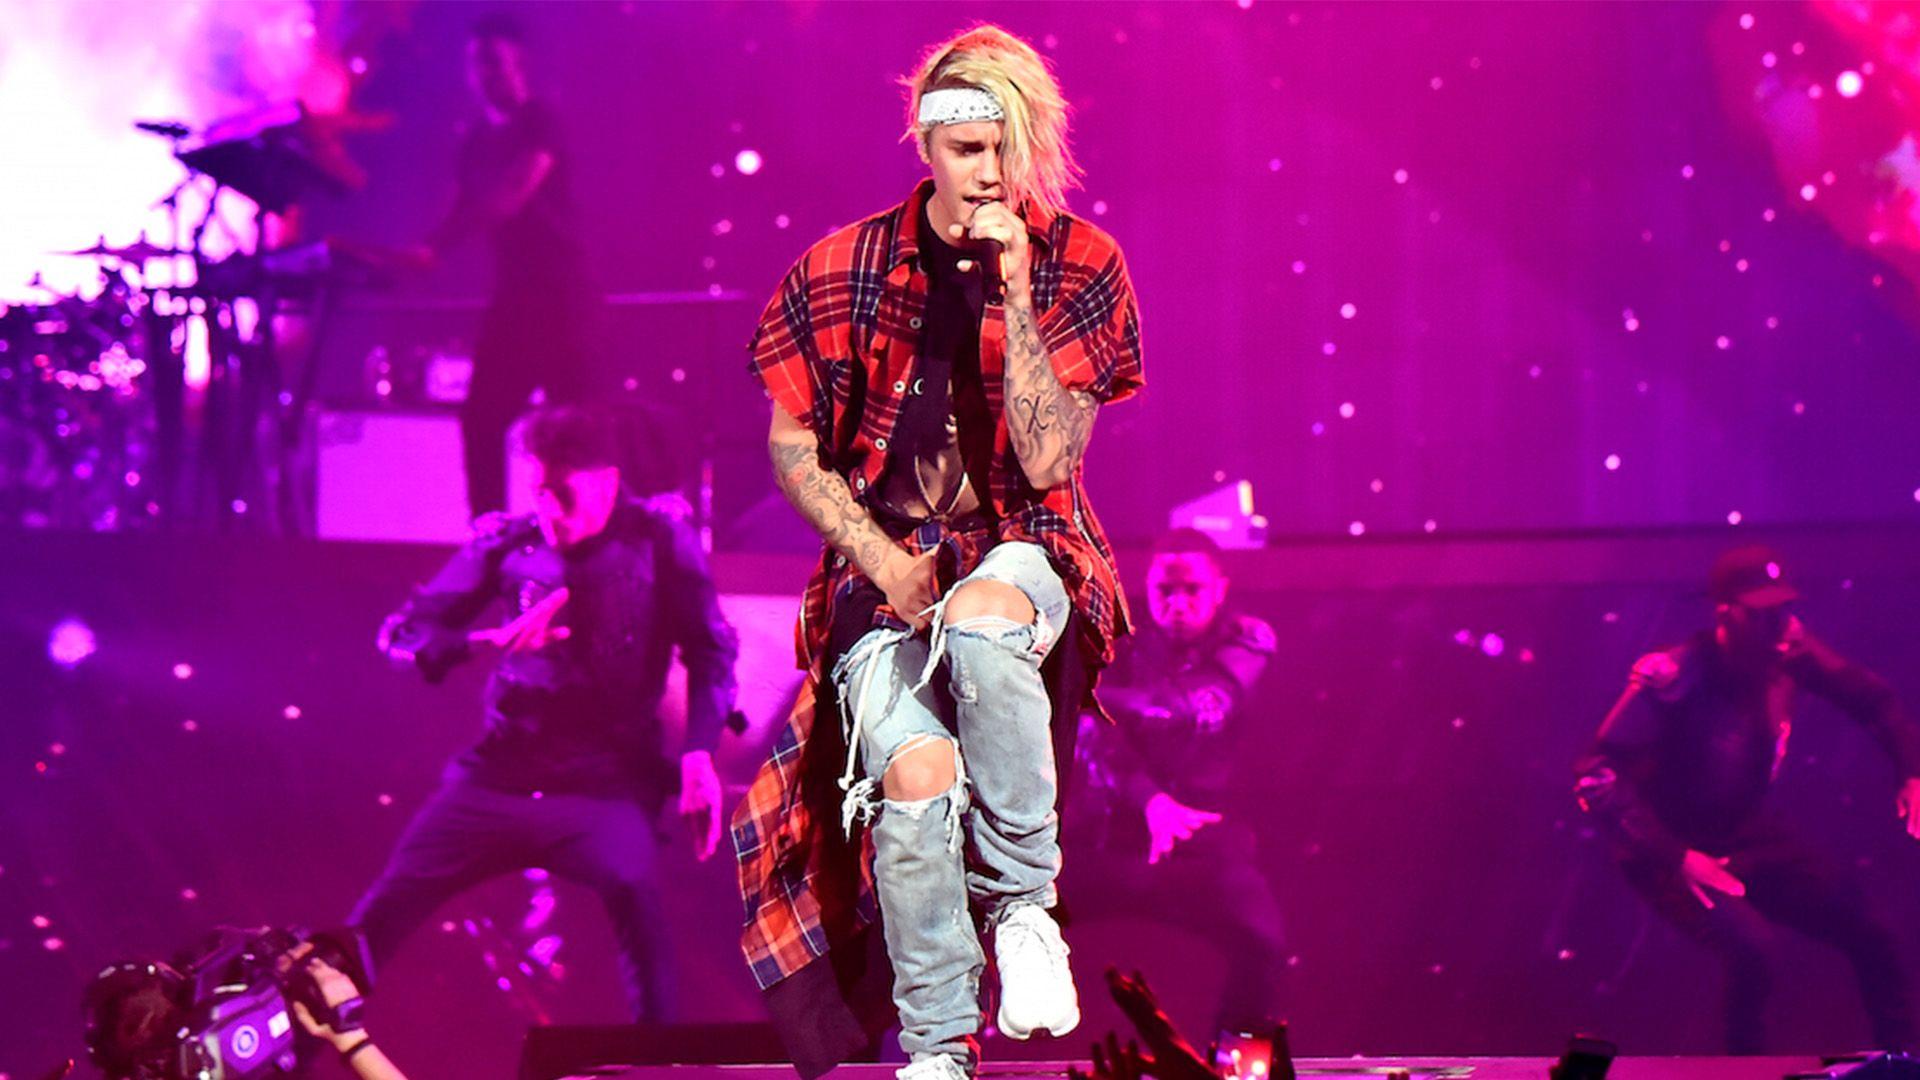 Justin Bieber shares Christian message with fans at concert: 'Mark